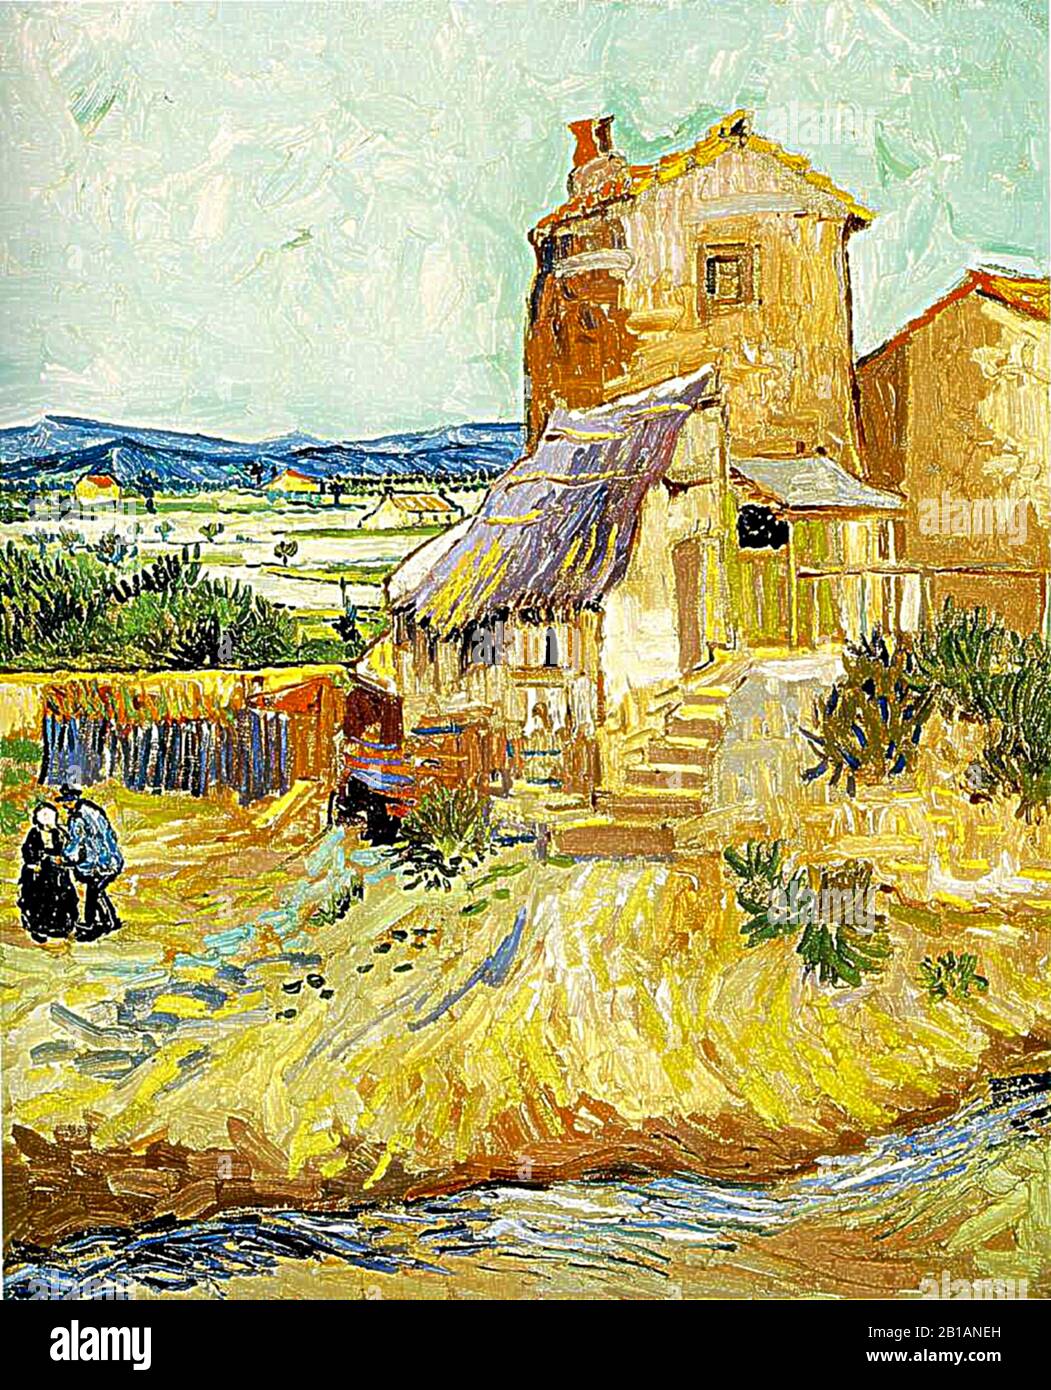 The Old Mill, 1888 - painting by Vincent van Gogh - Very high resolution and quality image Stock Photo